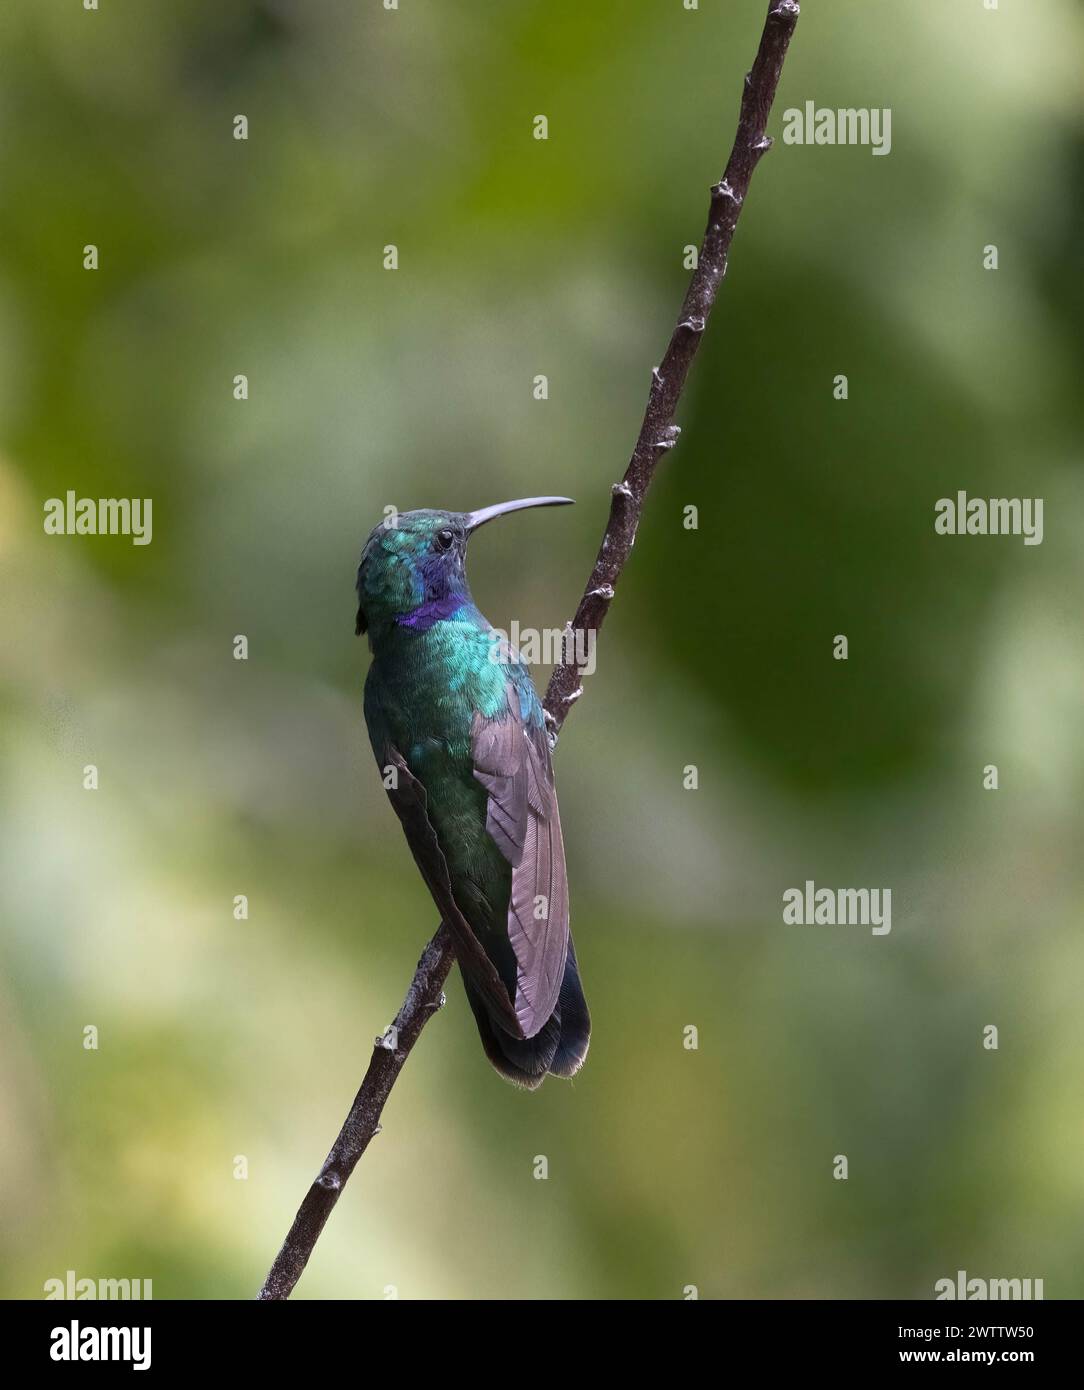 Closeup Male Violet-ear hummingbird on a branch with green background Stock Photo